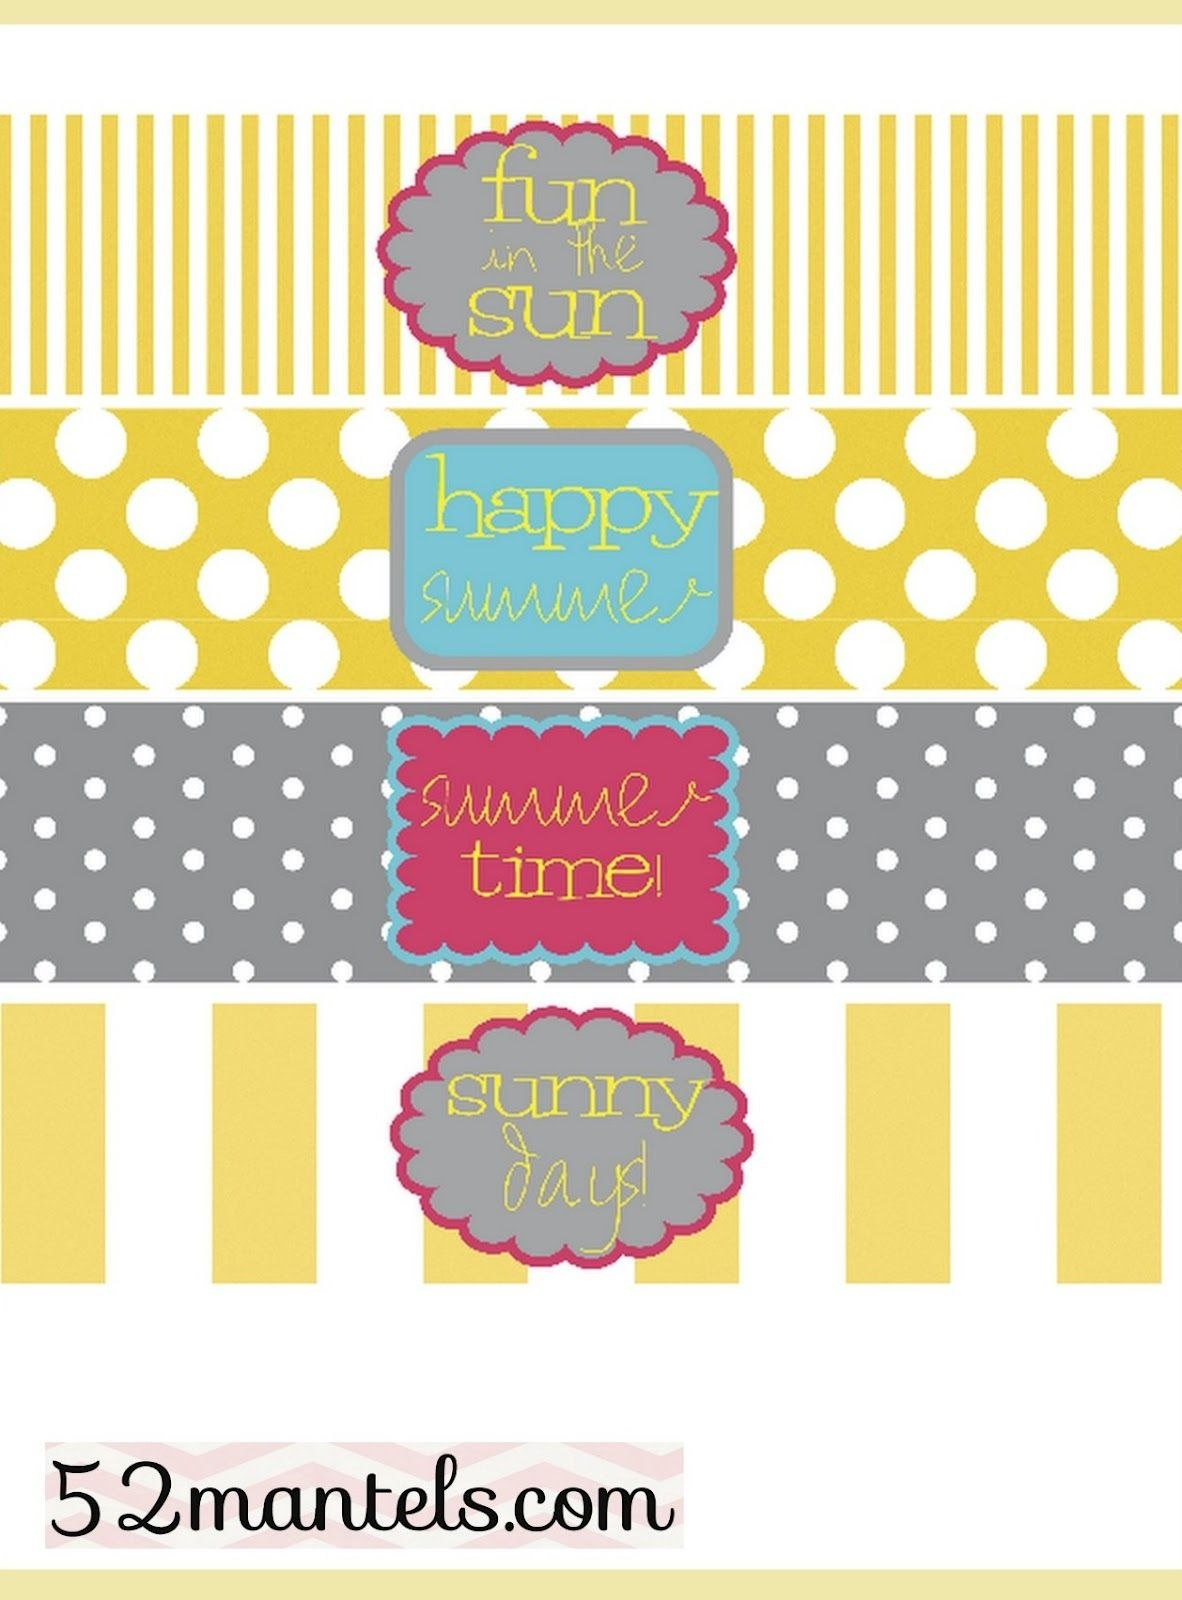 Free Water Bottle Labels For A Summer Party  Free Printablesfonts intended for Printable Water Bottle Labels Free Templates